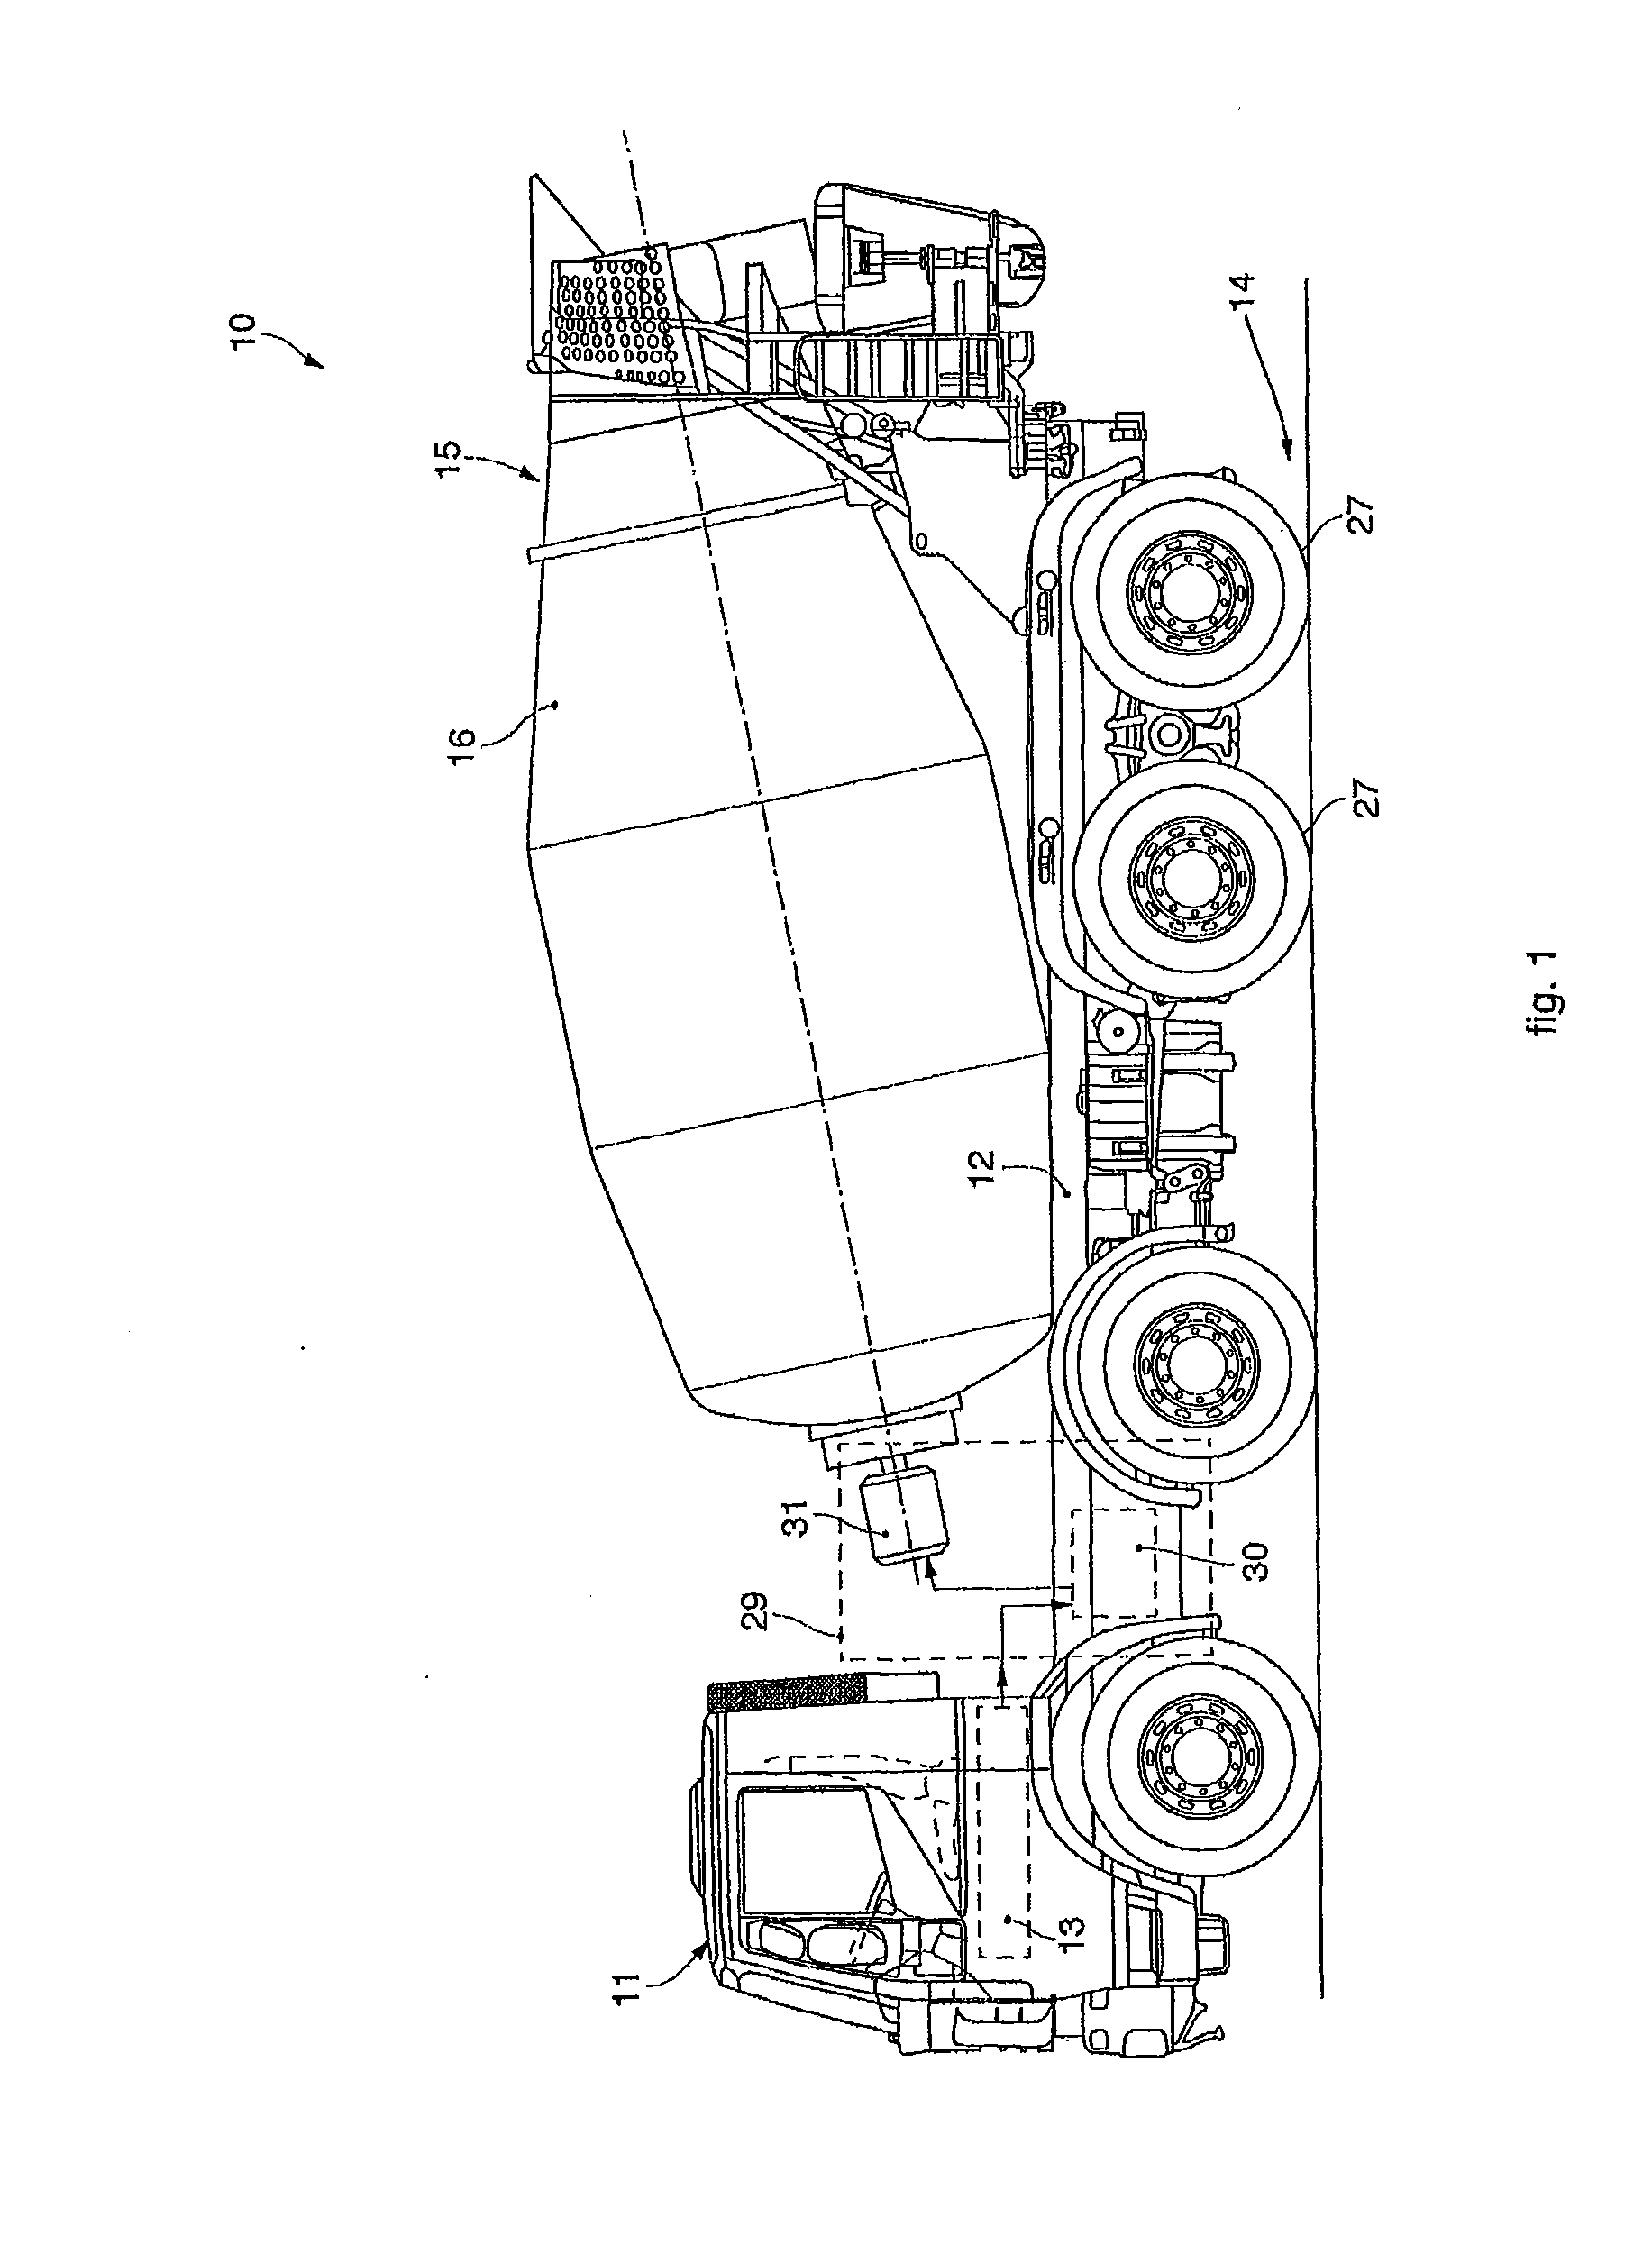 Concrete mixer with perfected auxiliary device